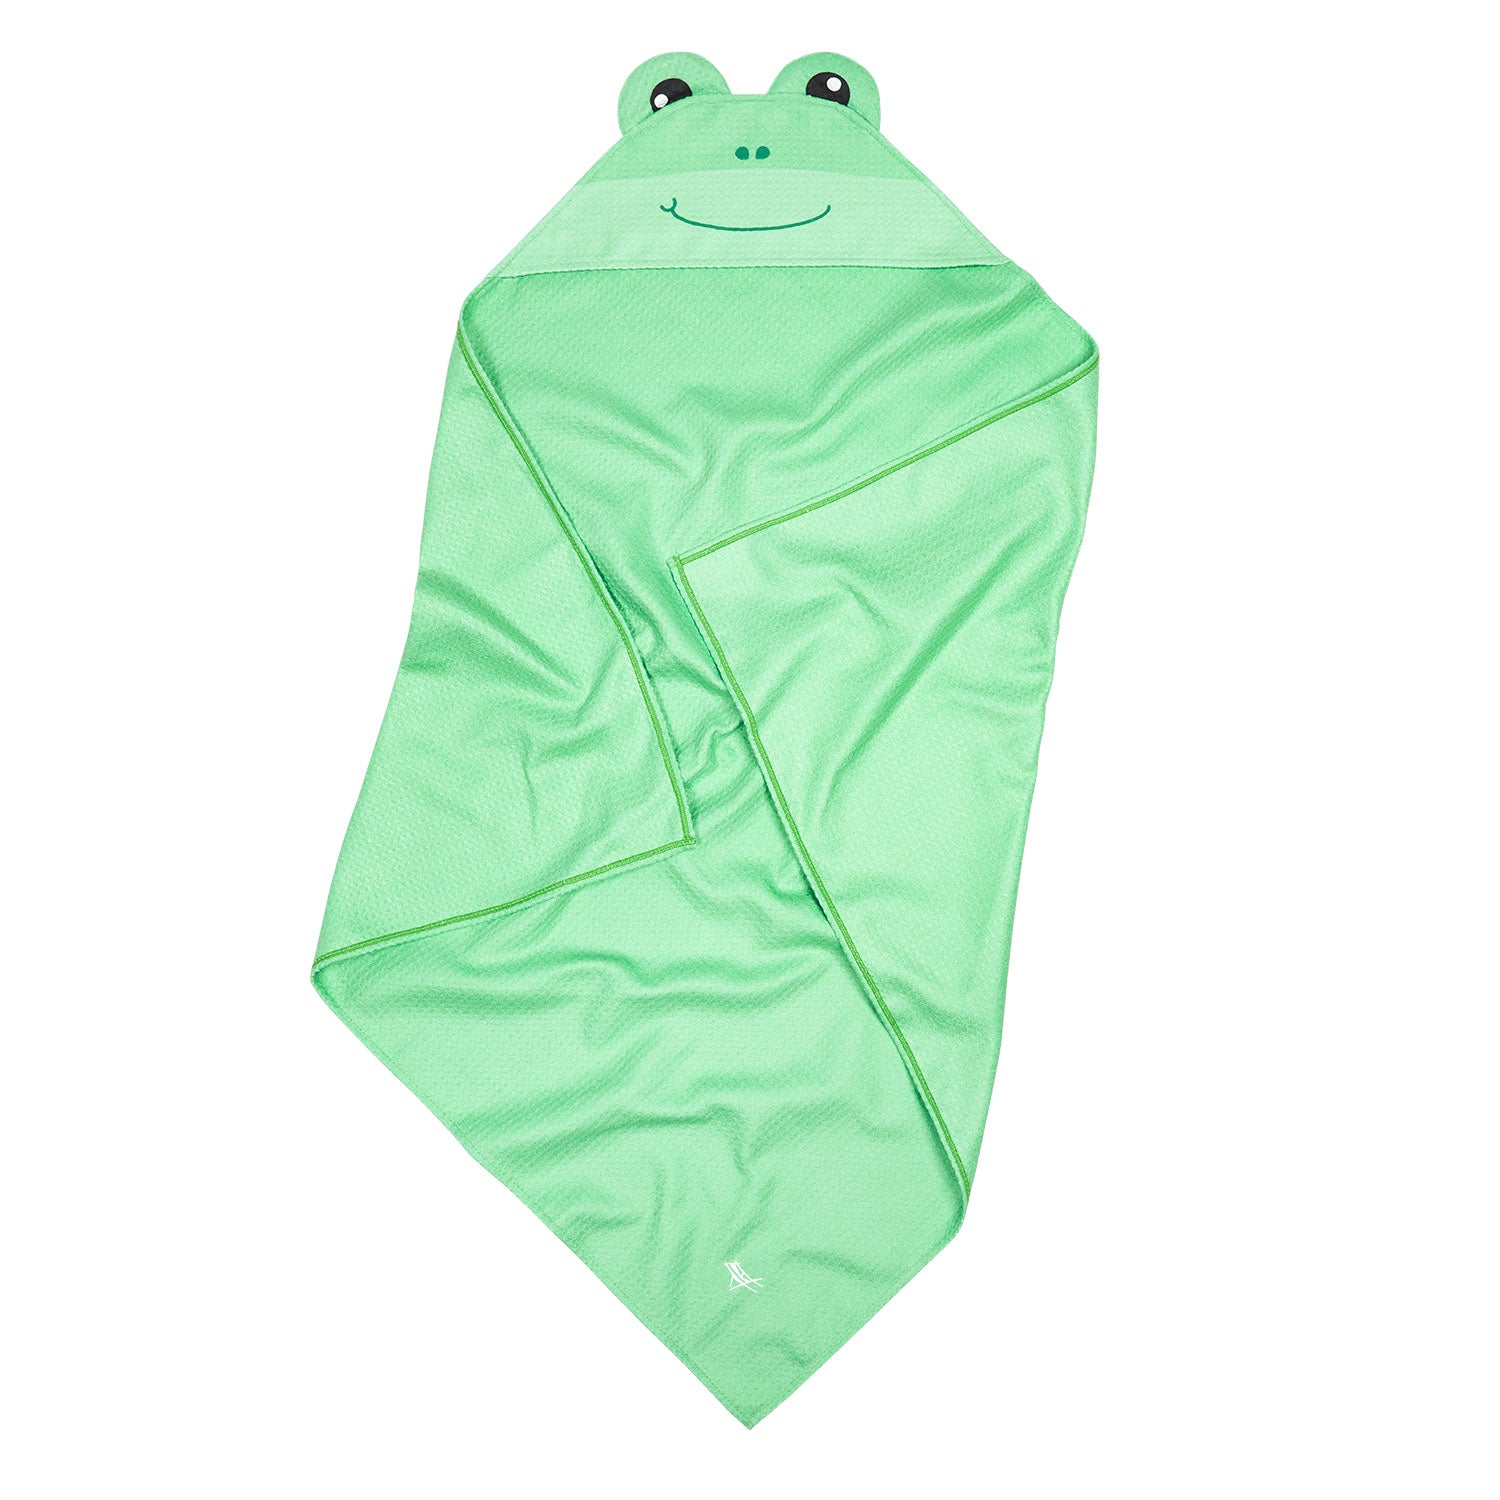 Dock and Bay Baby Hooded Towel